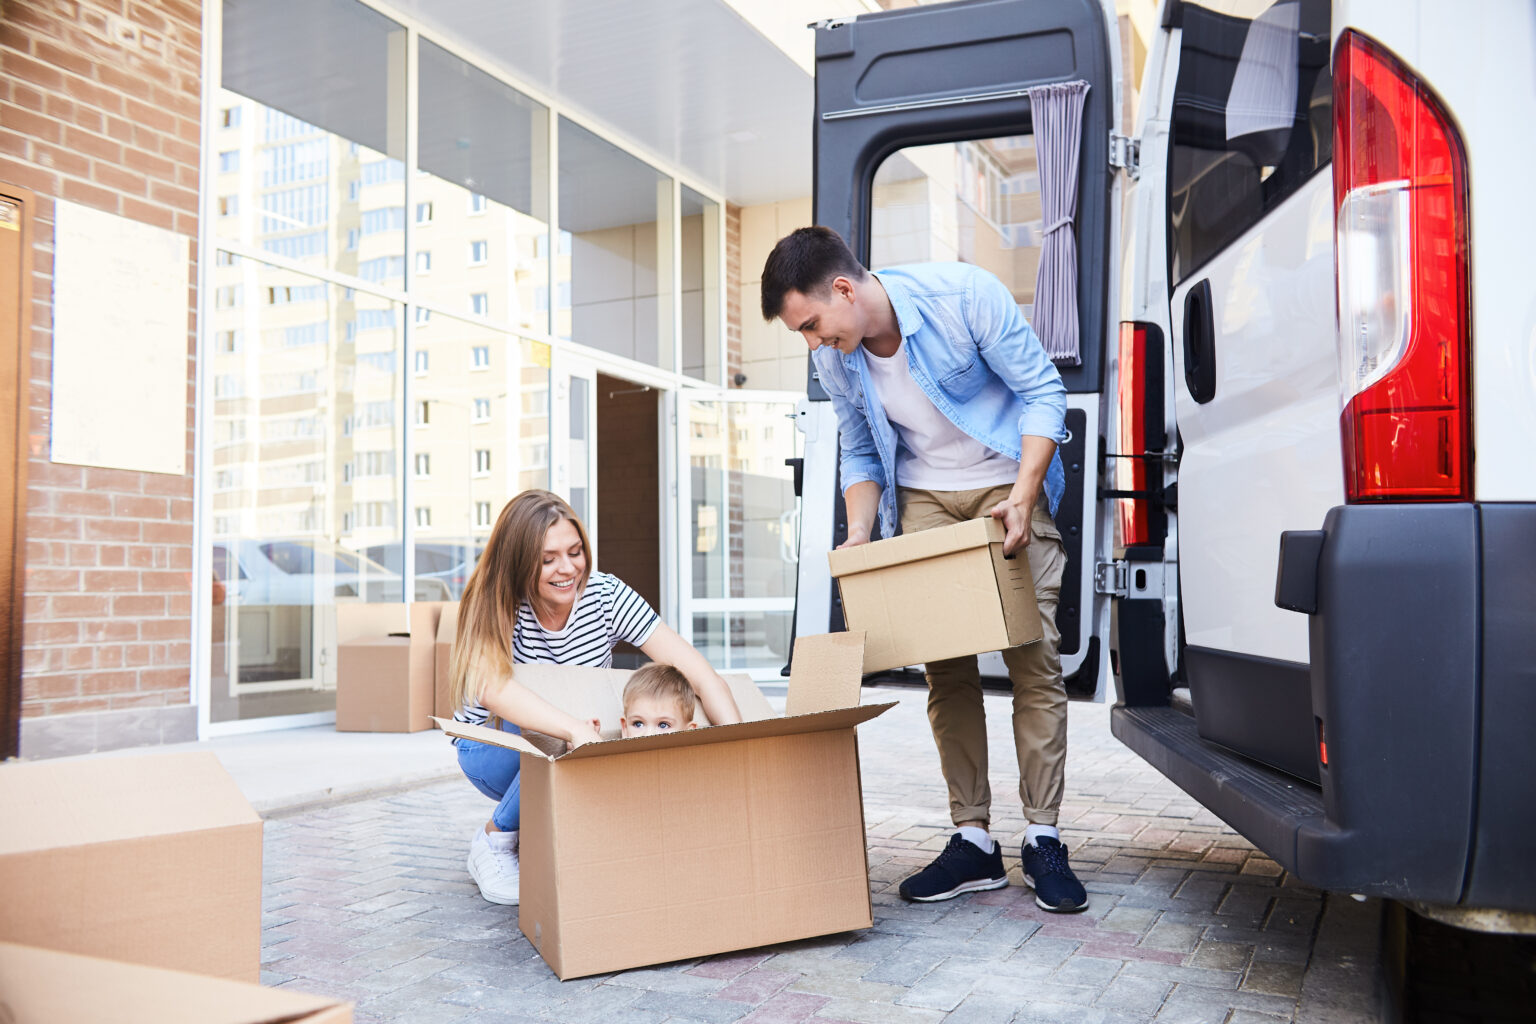 Portrait of happy young family with little child loading cardboard boxes into moving van outdoors